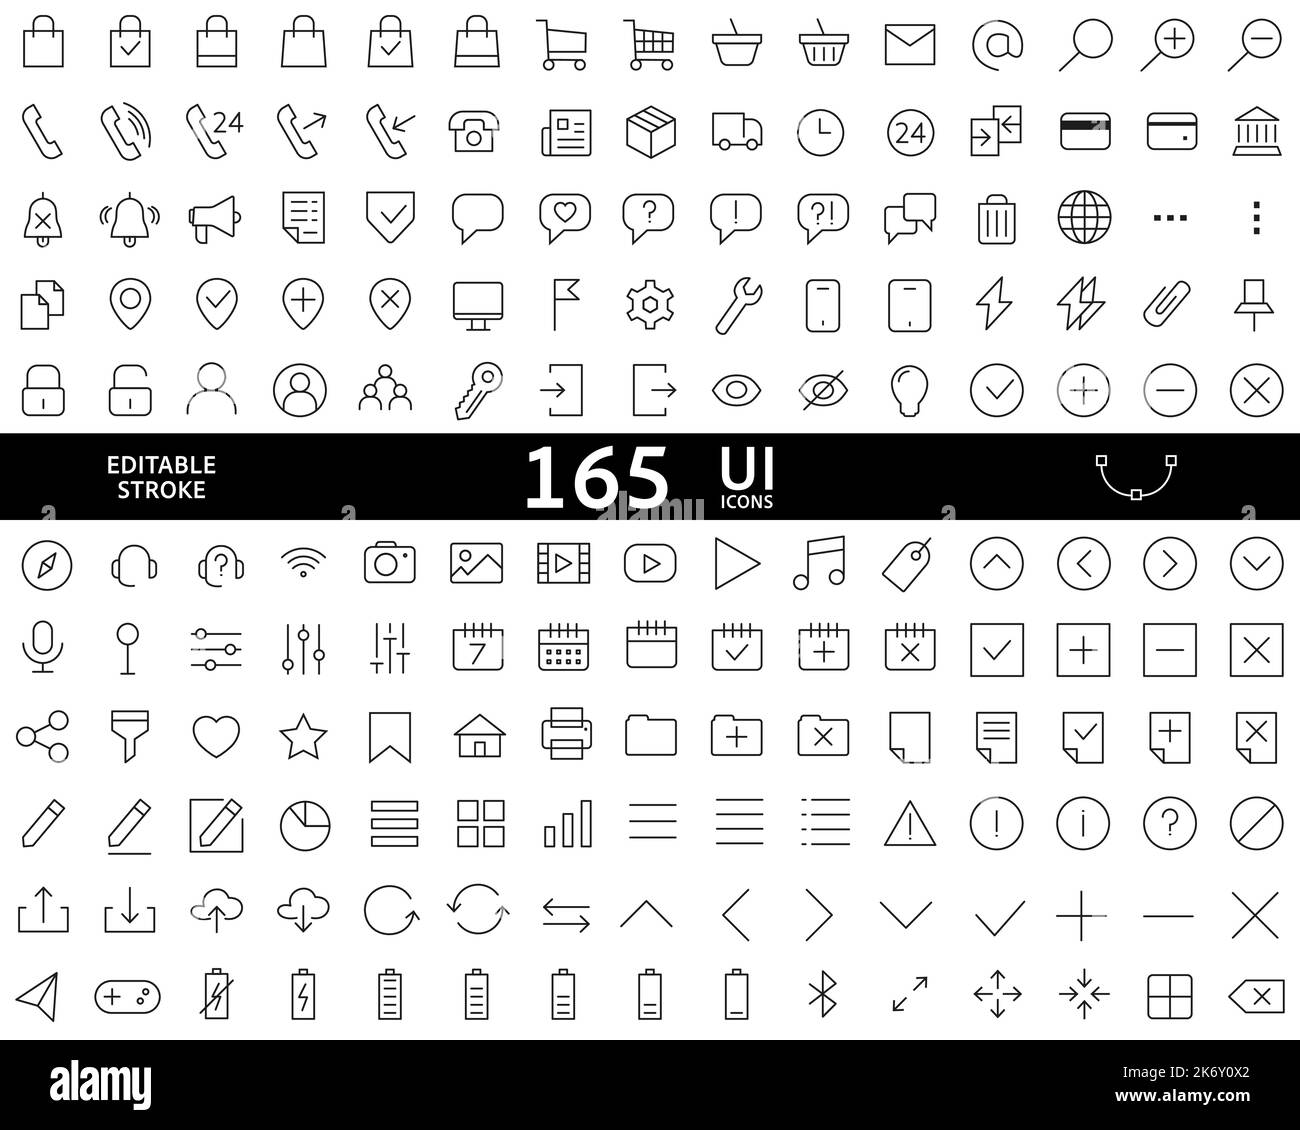 Rectangular style website icons ui material design set. Set of ecommerce and online shopping icons - cart, bag, delivery truck, payments, arrows, user Stock Vector